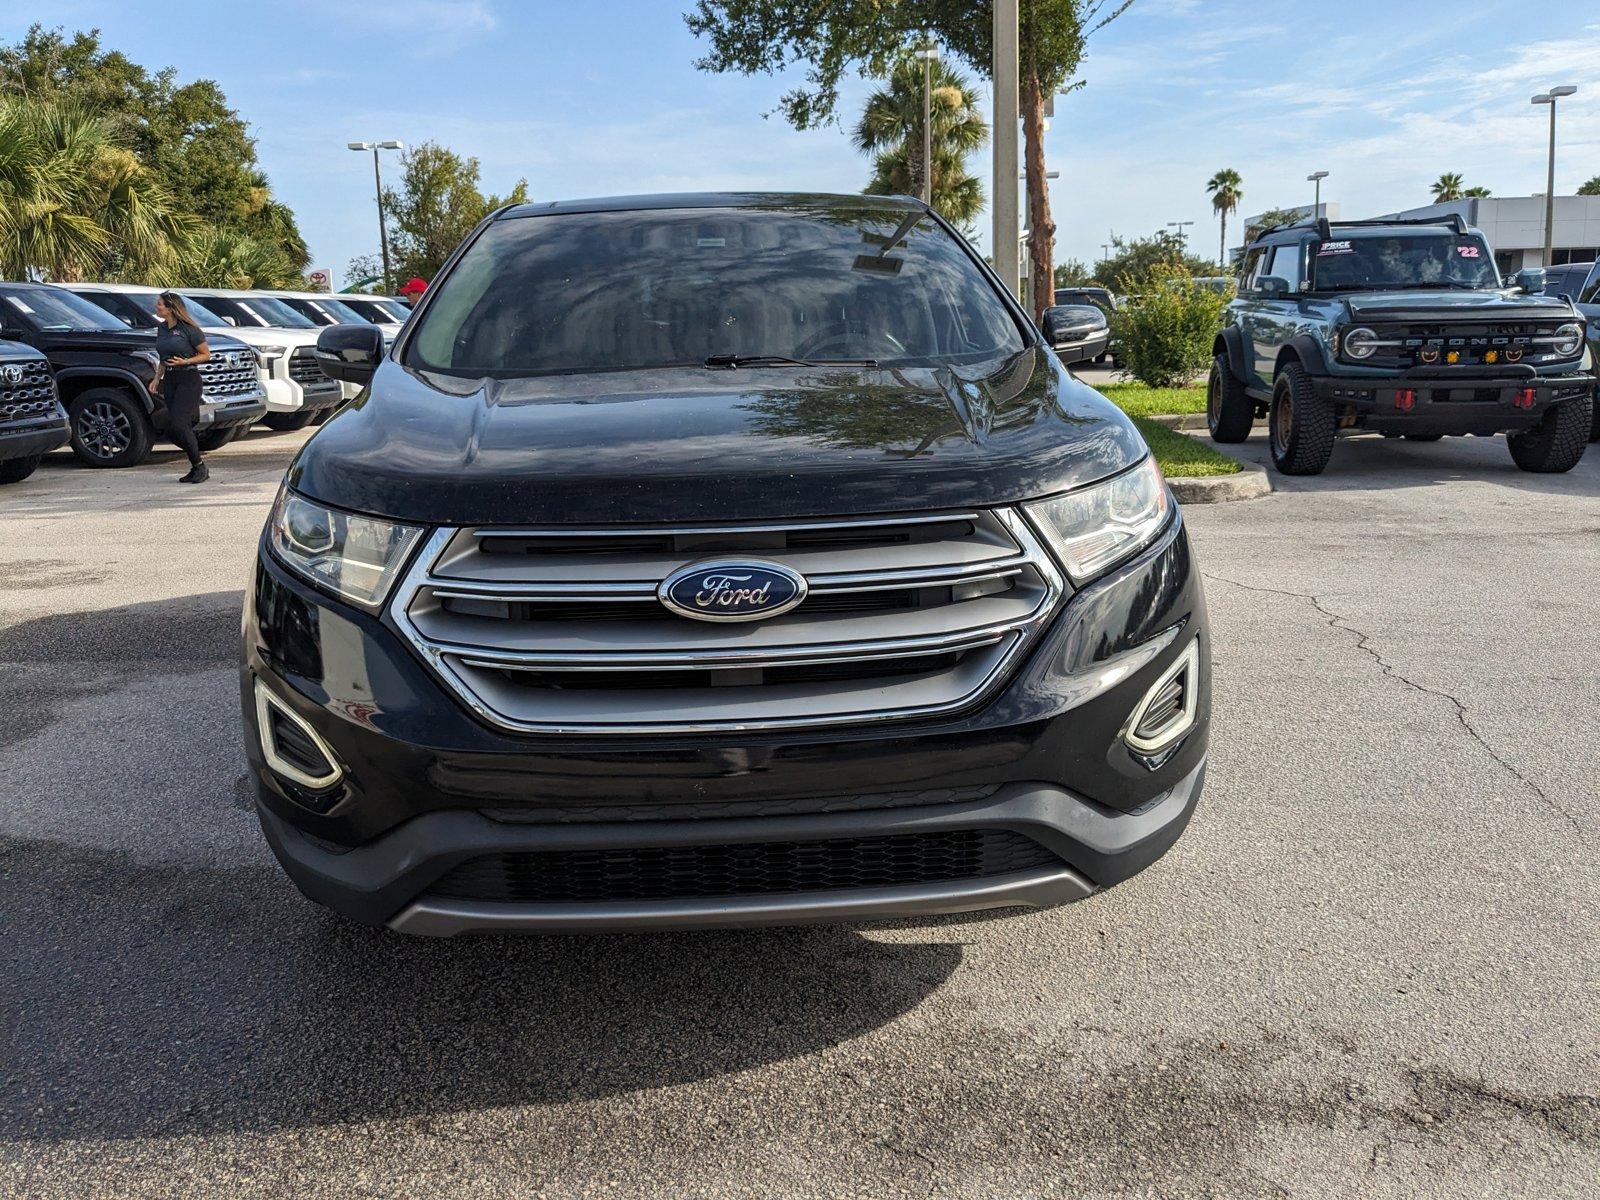 2017 Ford Edge Vehicle Photo in Winter Park, FL 32792